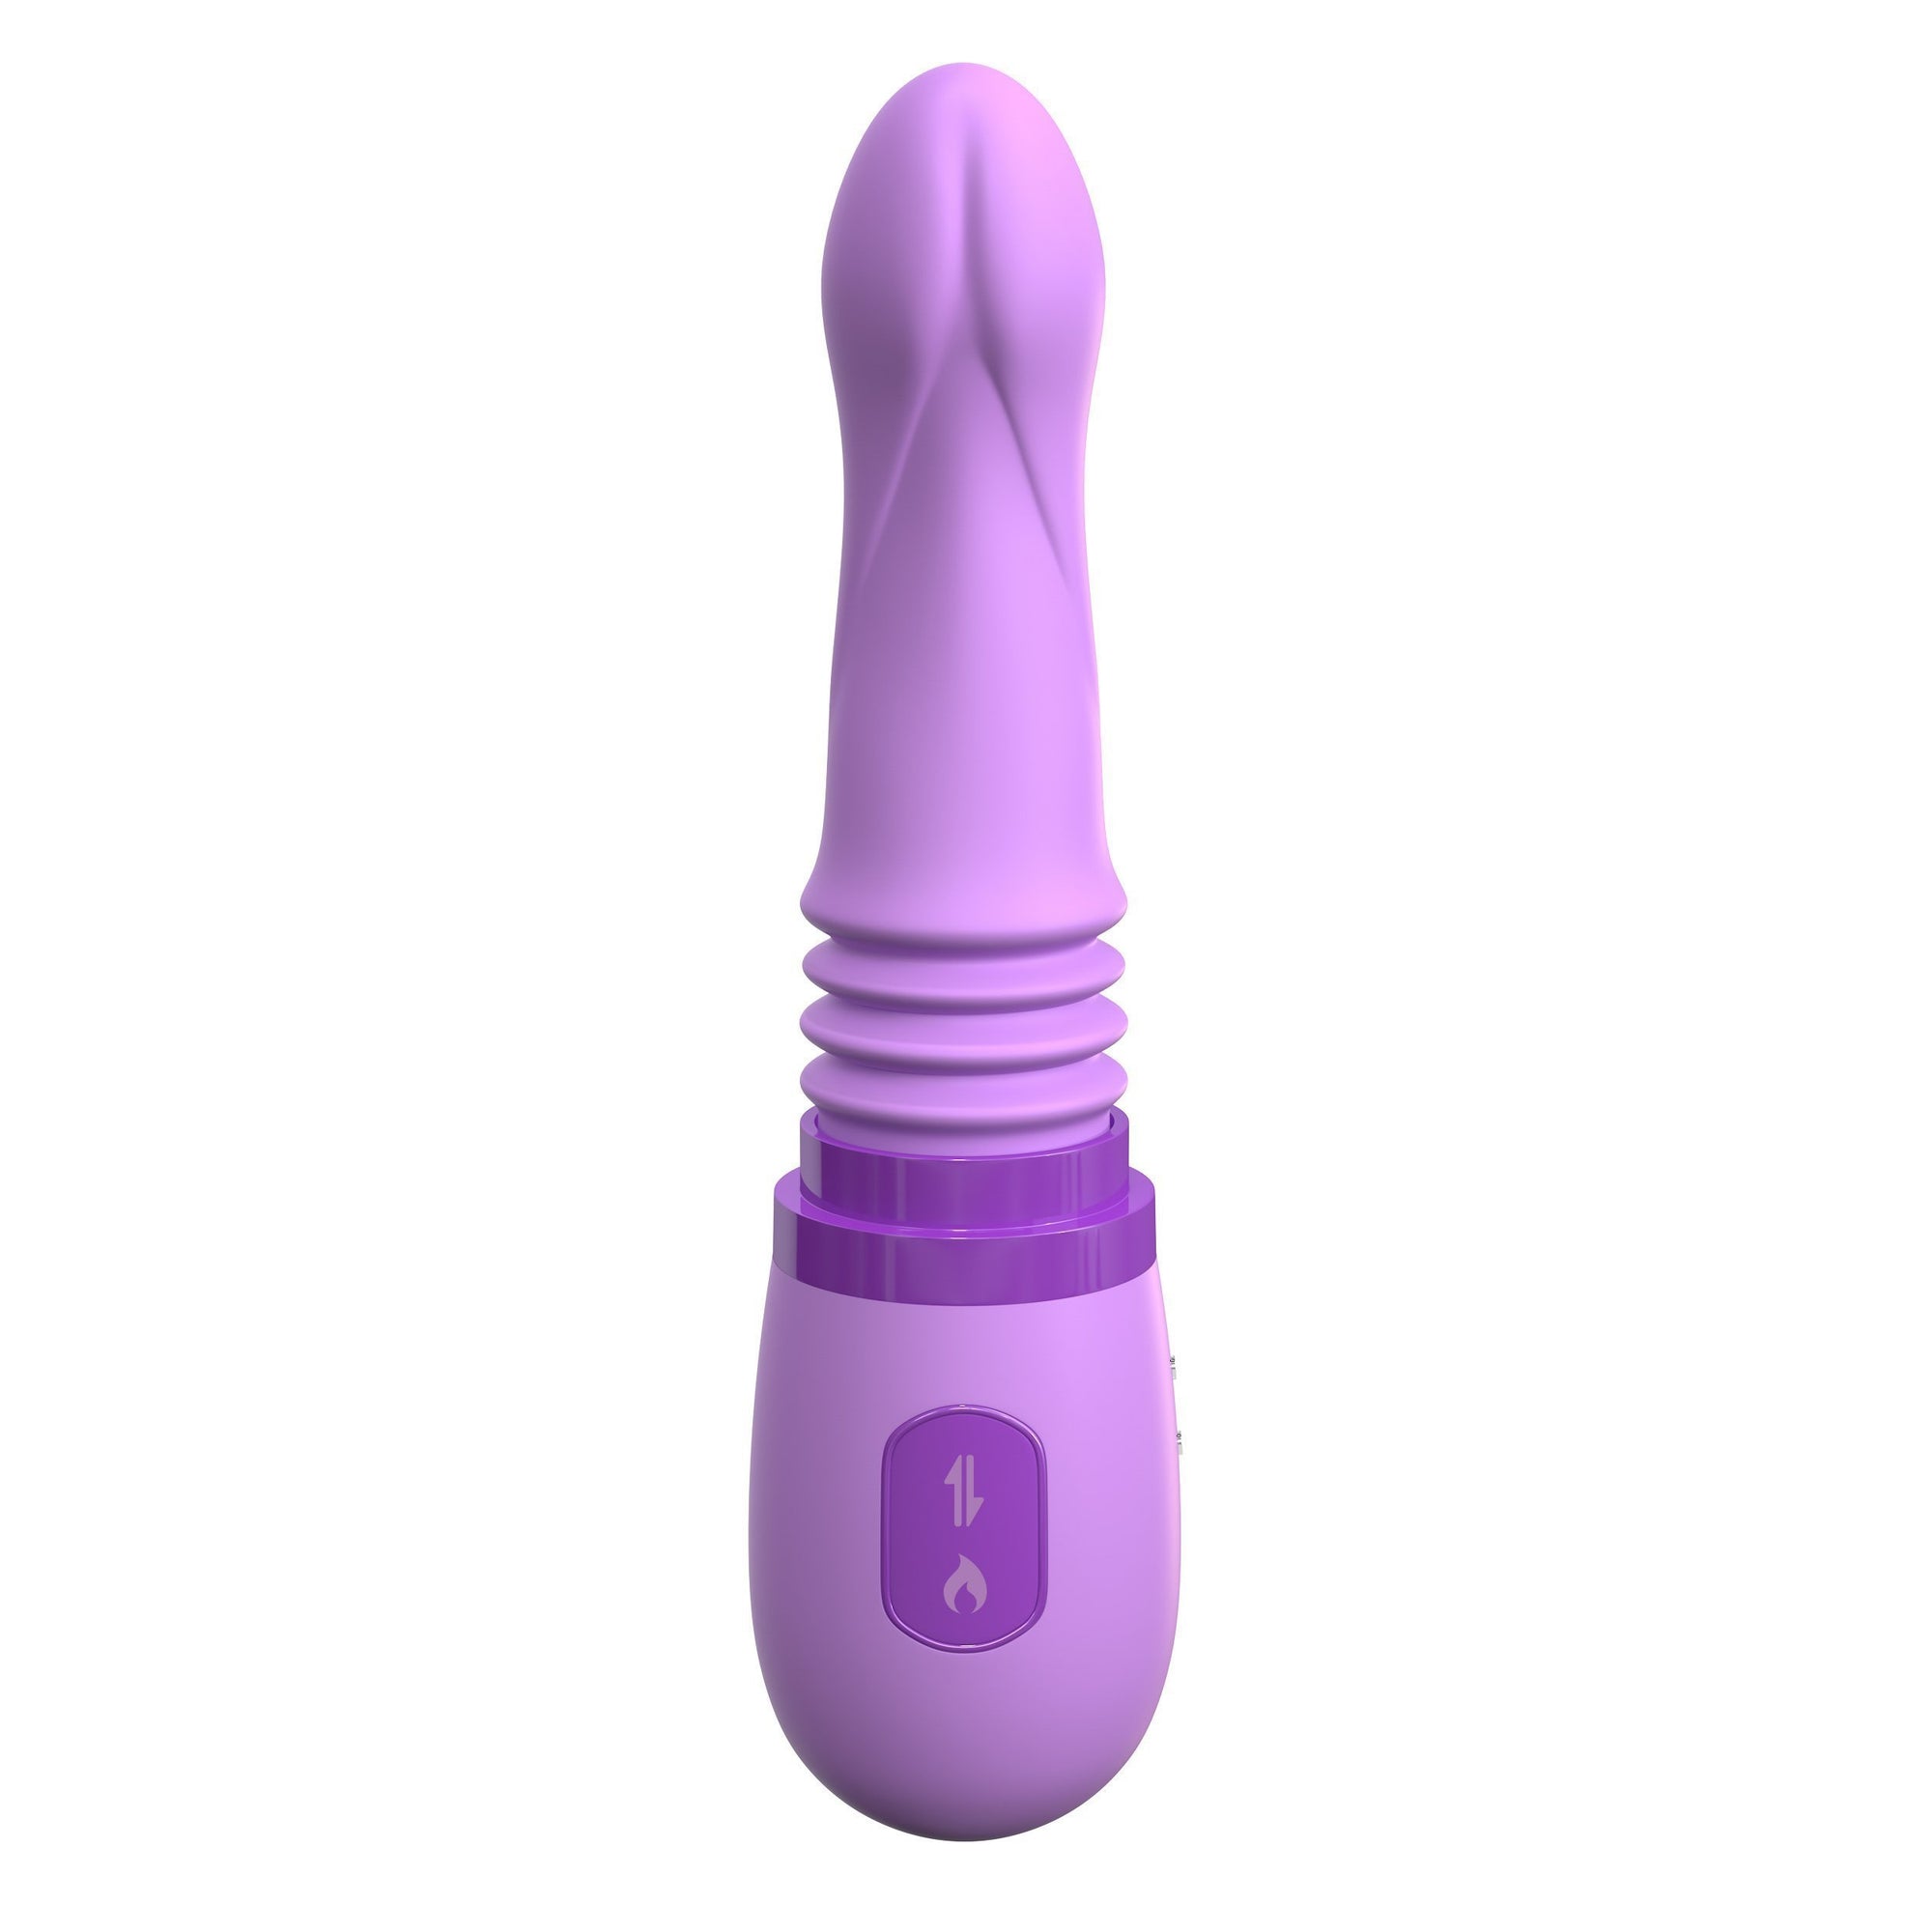 Pipedream - Fantasy For Her Her Personal Sex Machine Vibrator (Purple) G Spot Dildo (Vibration) Rechargeable